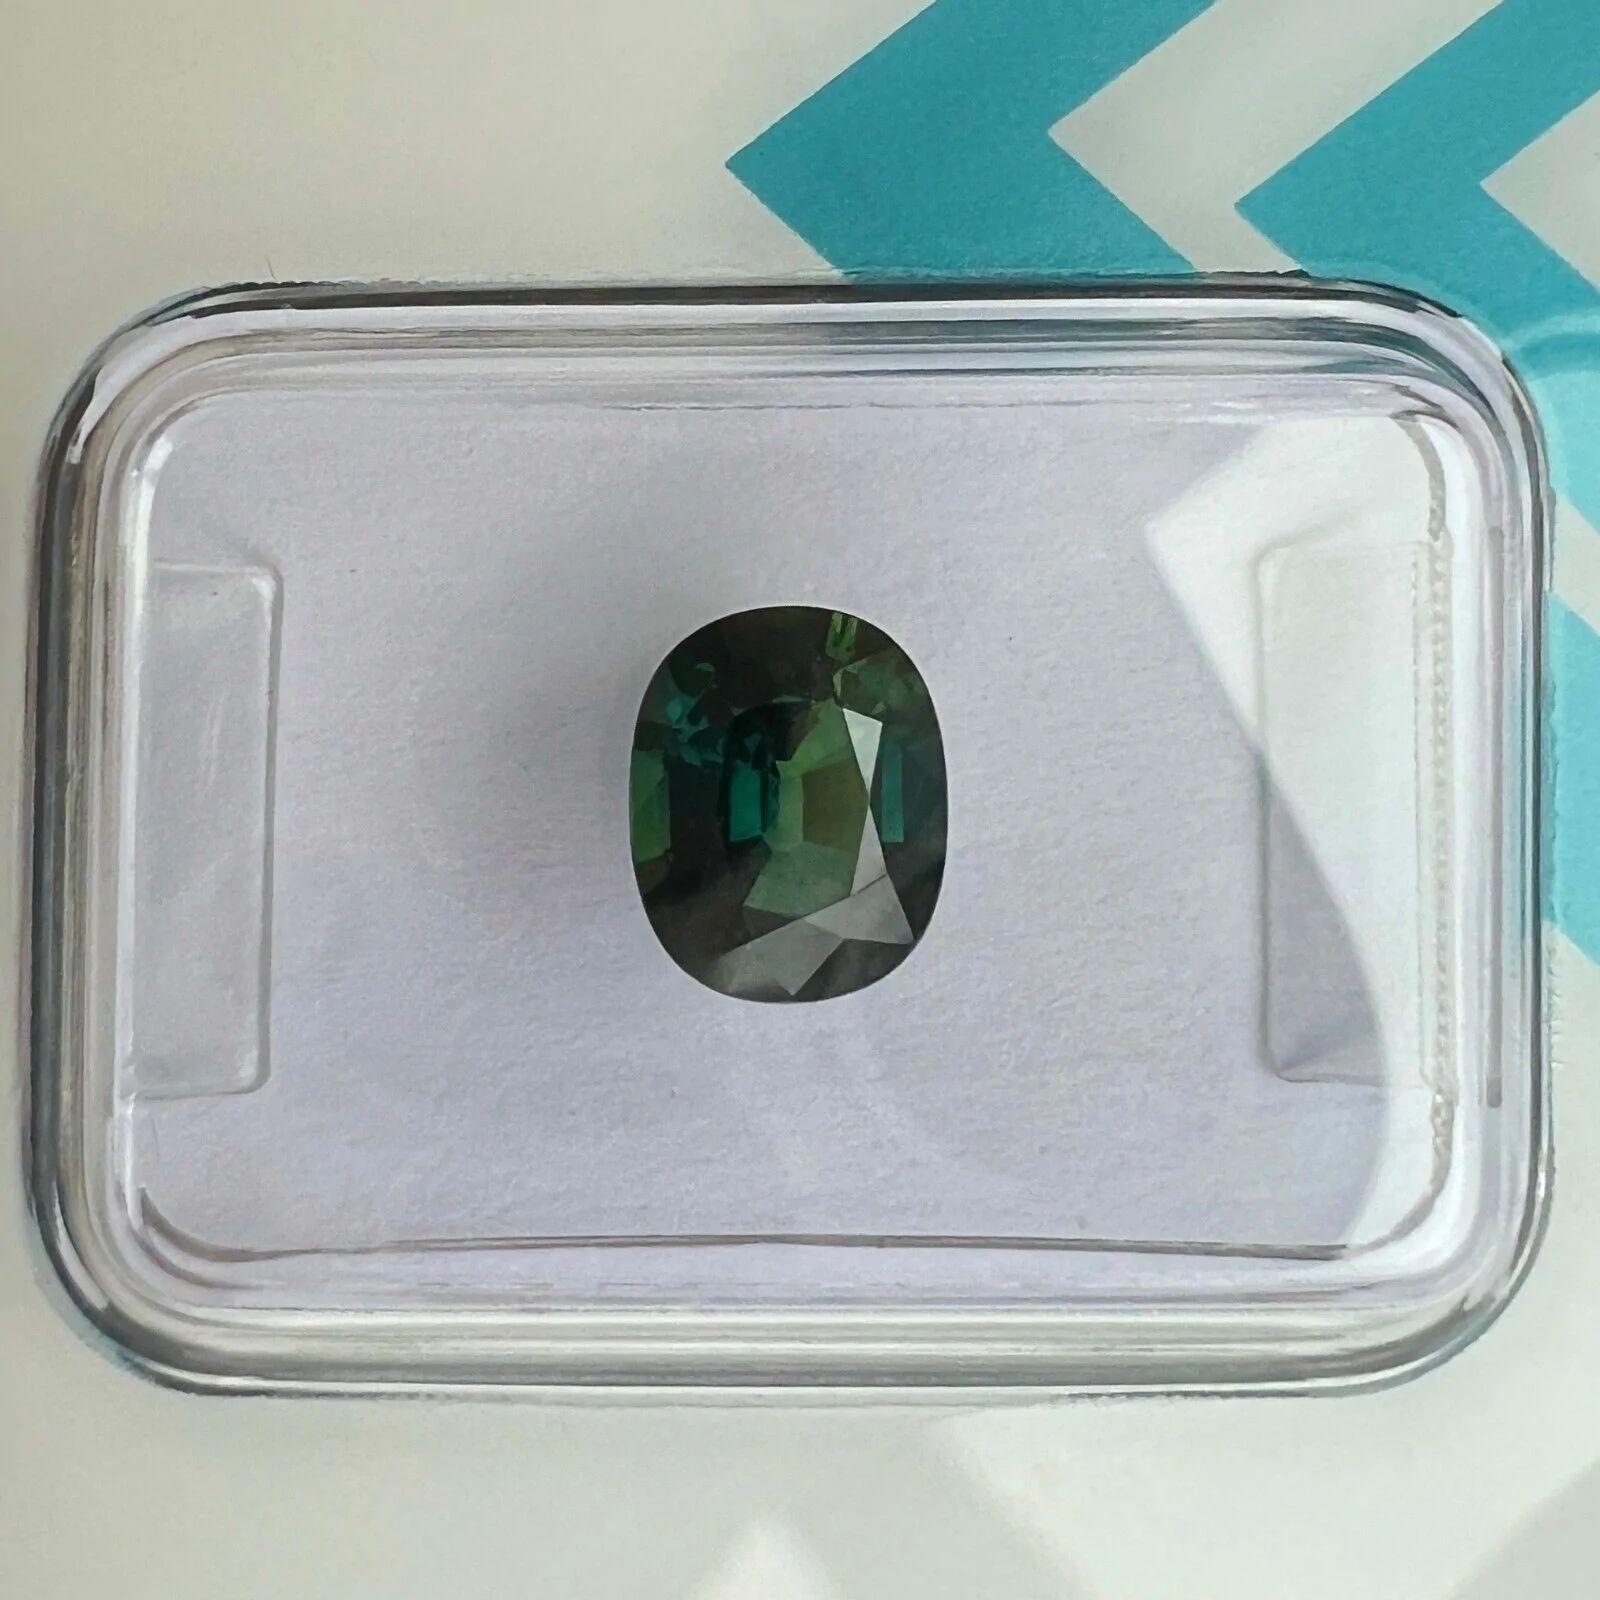 1.32ct Australian Deep Green Blue Teal Sapphire No Heat Oval Cut IGI Certified

Fine Deep Green Blue Untreated ‘Teal’ Sapphire In IGI Blister.
1.32 Carat with a beautiful blue green colour, an excellent oval cut and very good clarity. A clean stone